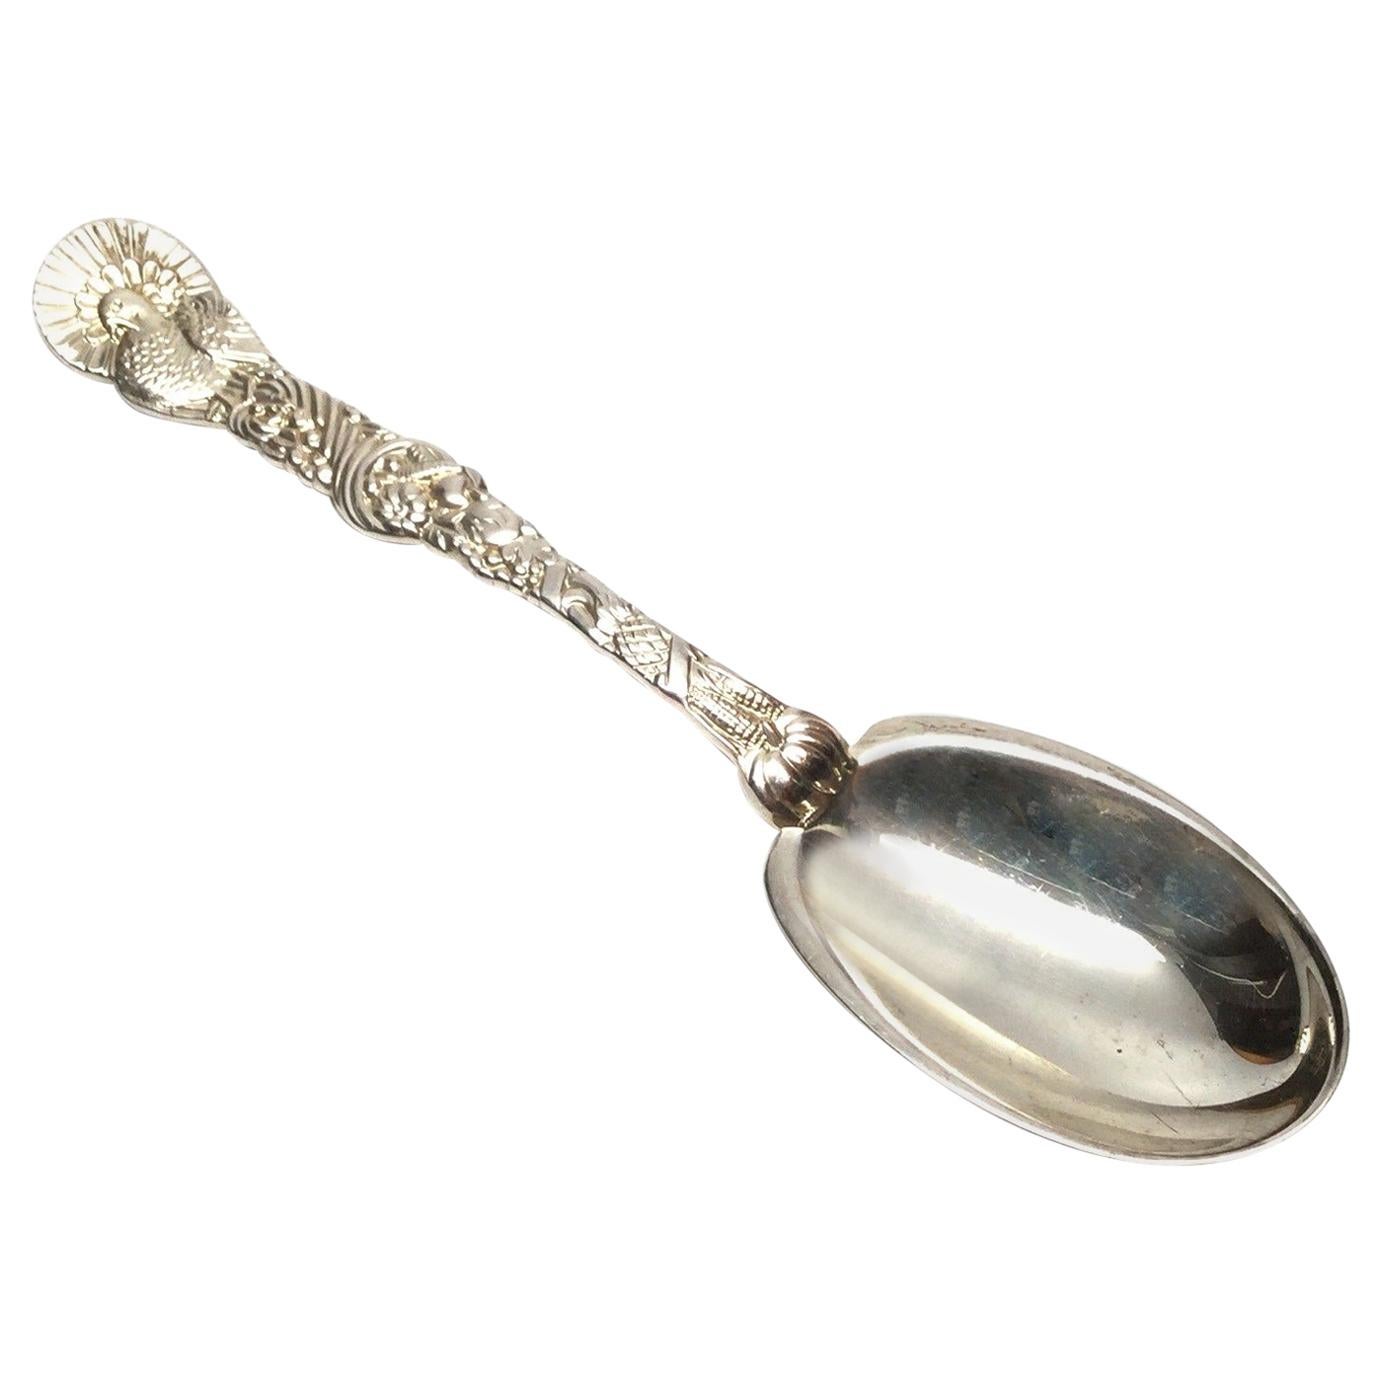 Tiffany & Co. Sterling Silver Thanksgiving Cranberry Serving Spoon